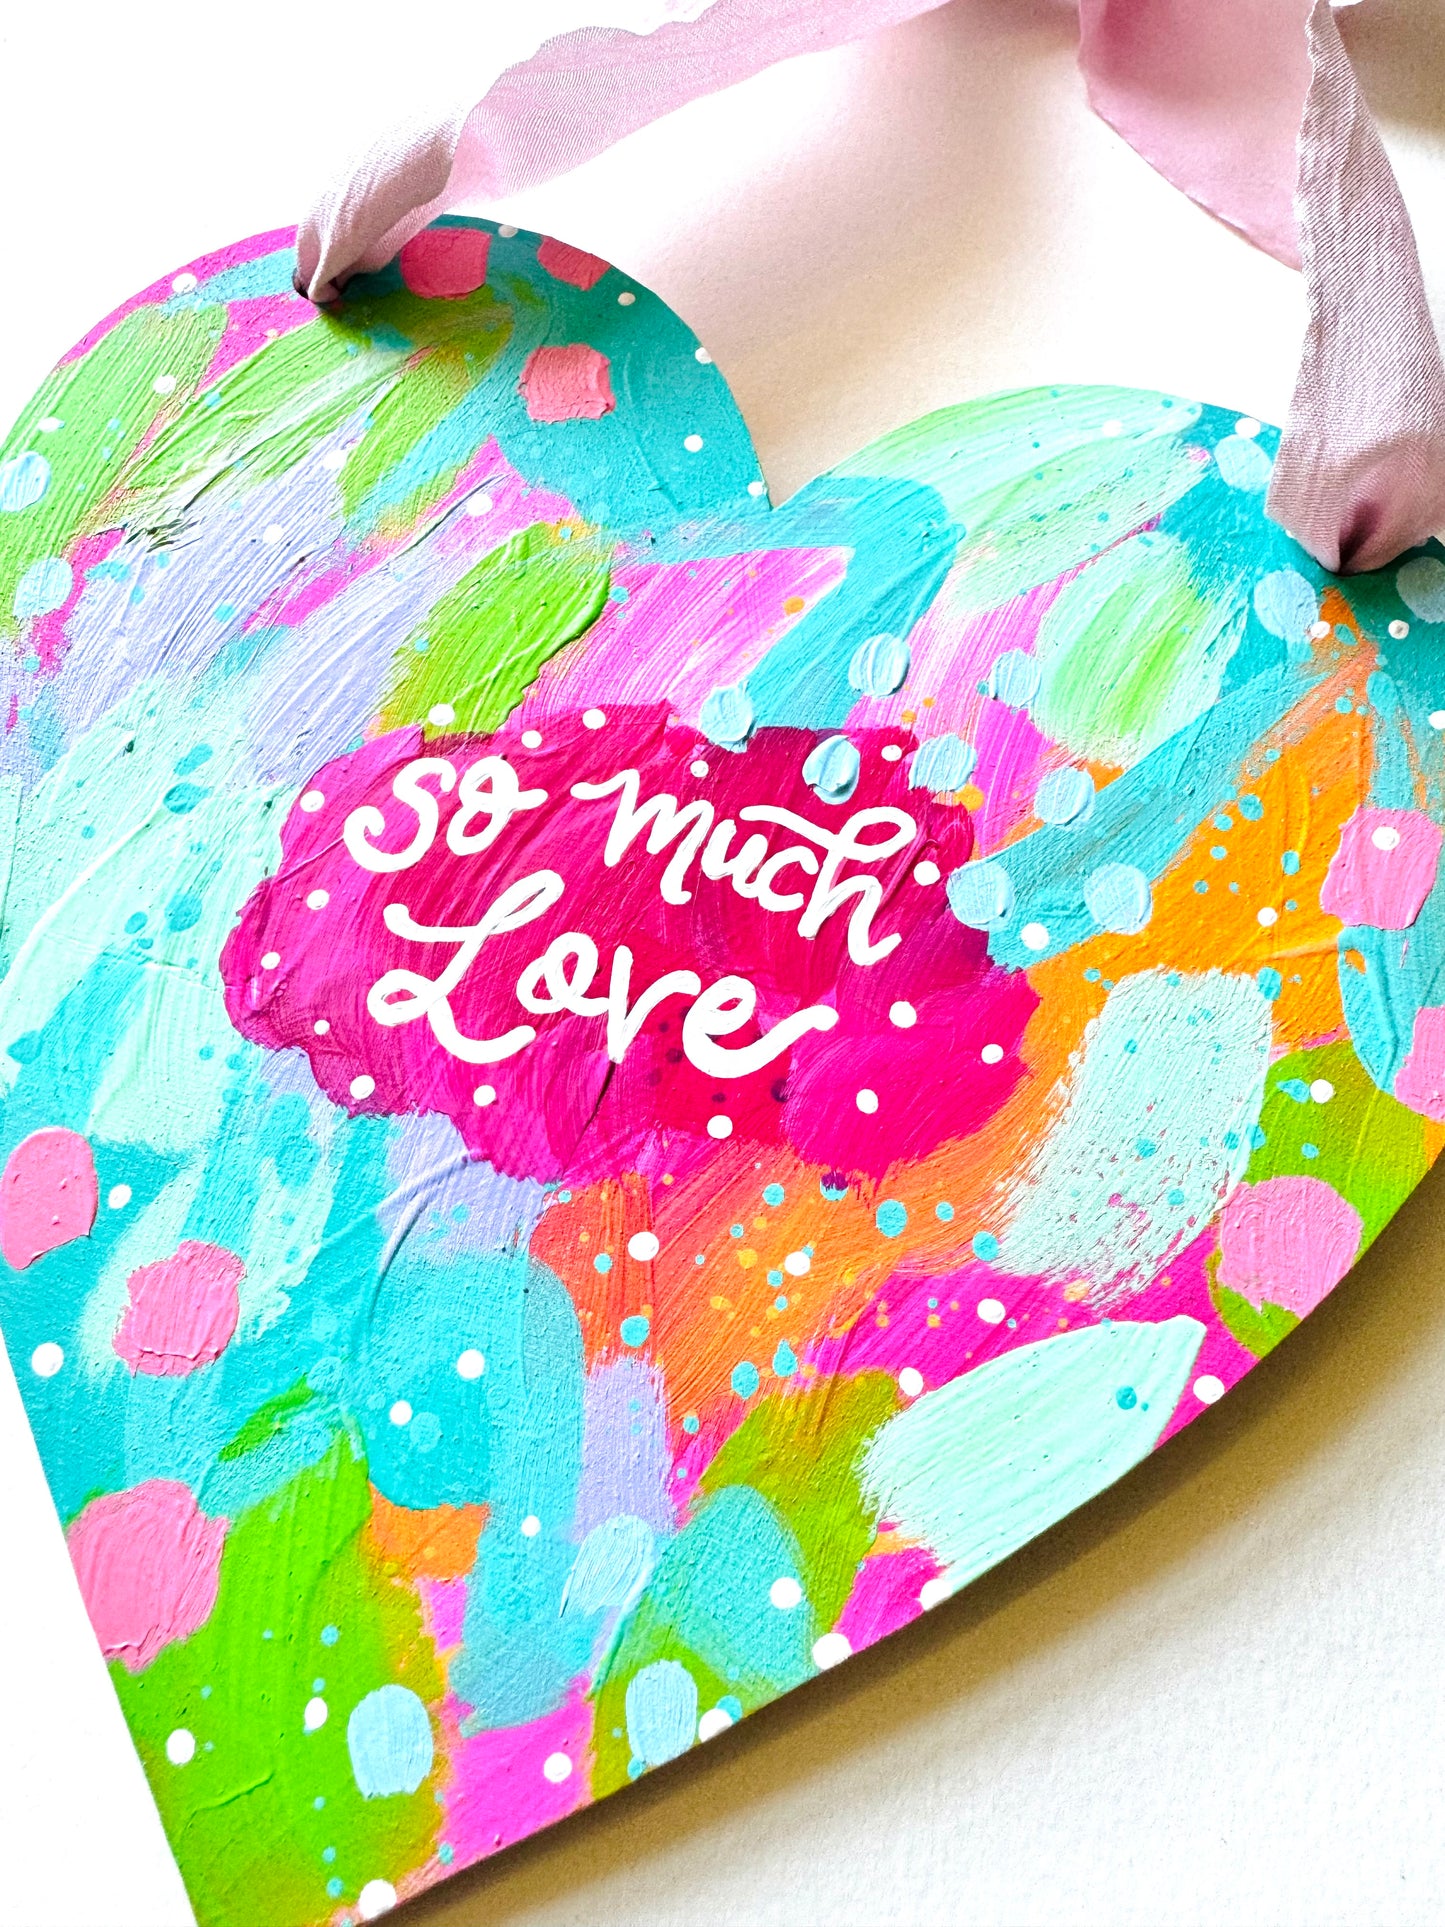 Original painting, wooden heart wall hanging with bow no.2